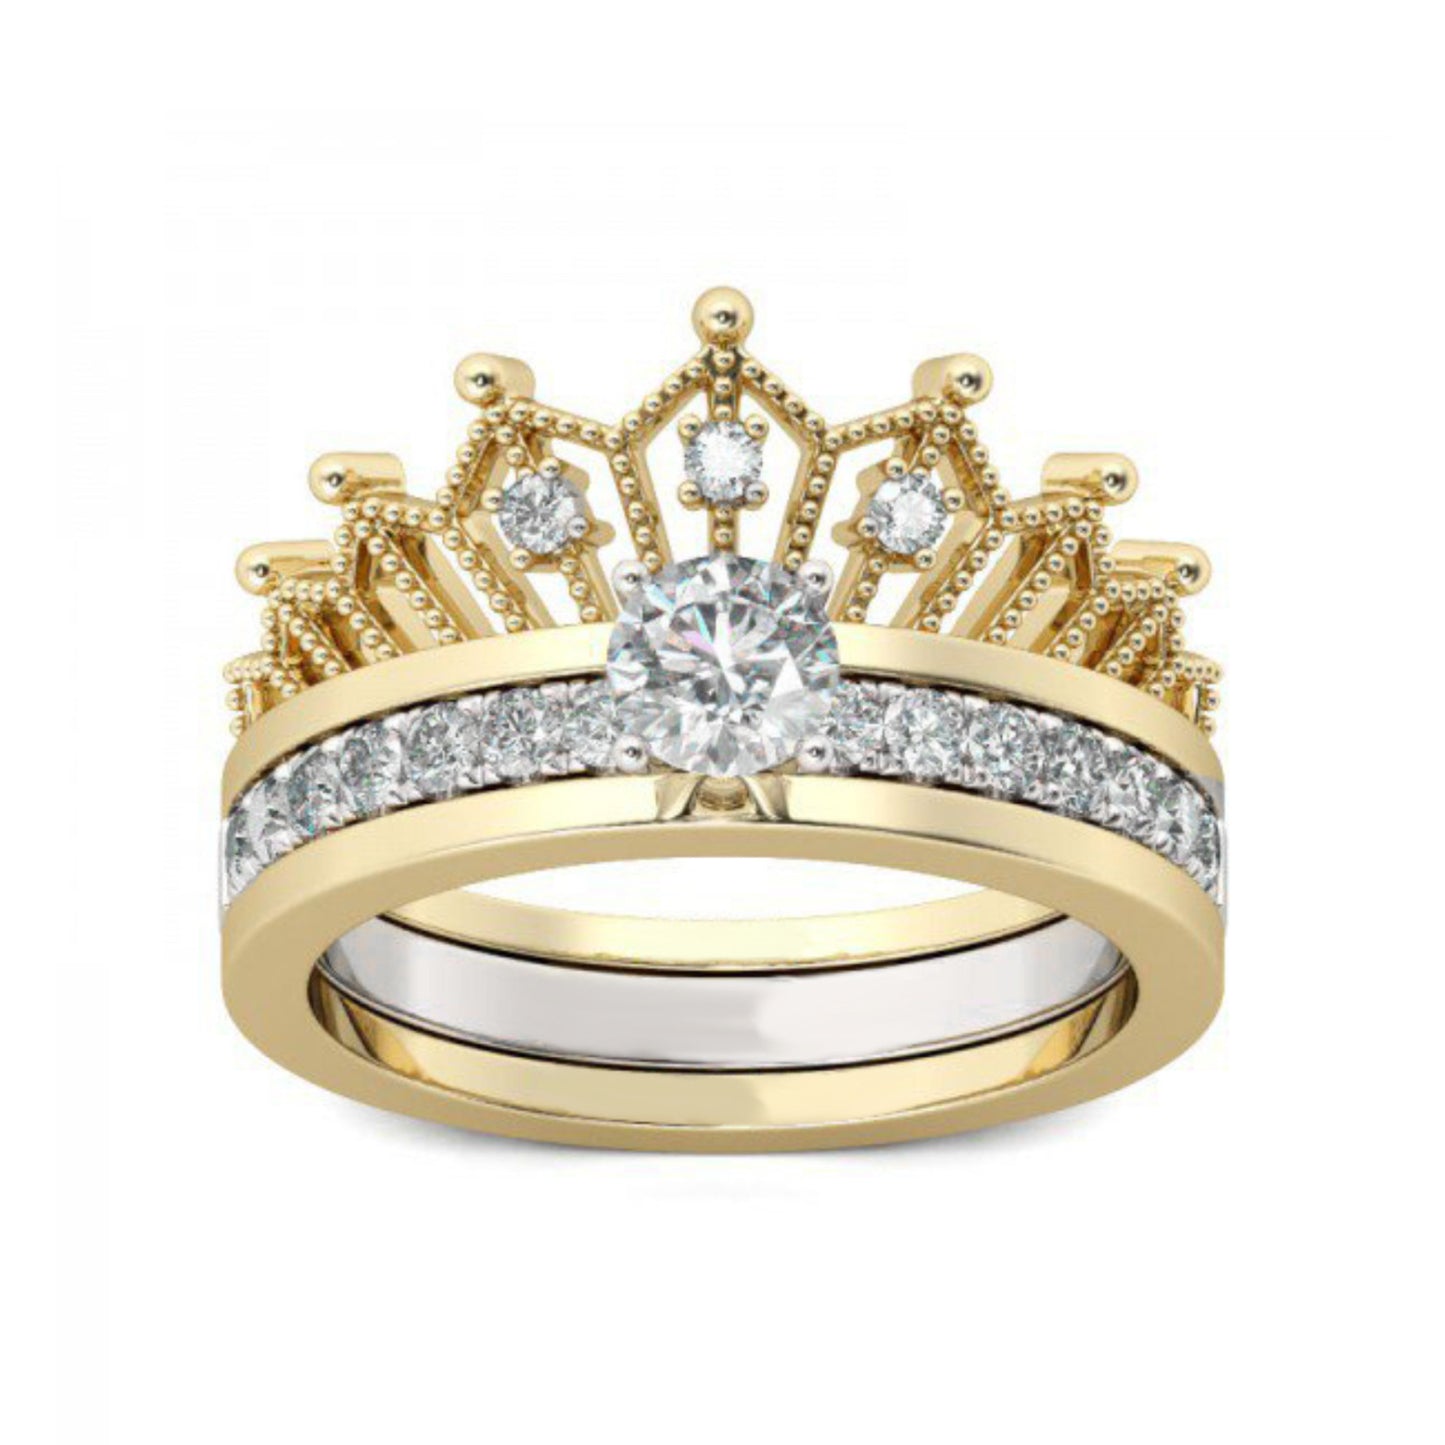 Luxury Crown Design Princess Style S925 Sterling Silver Zircon Ring for Women